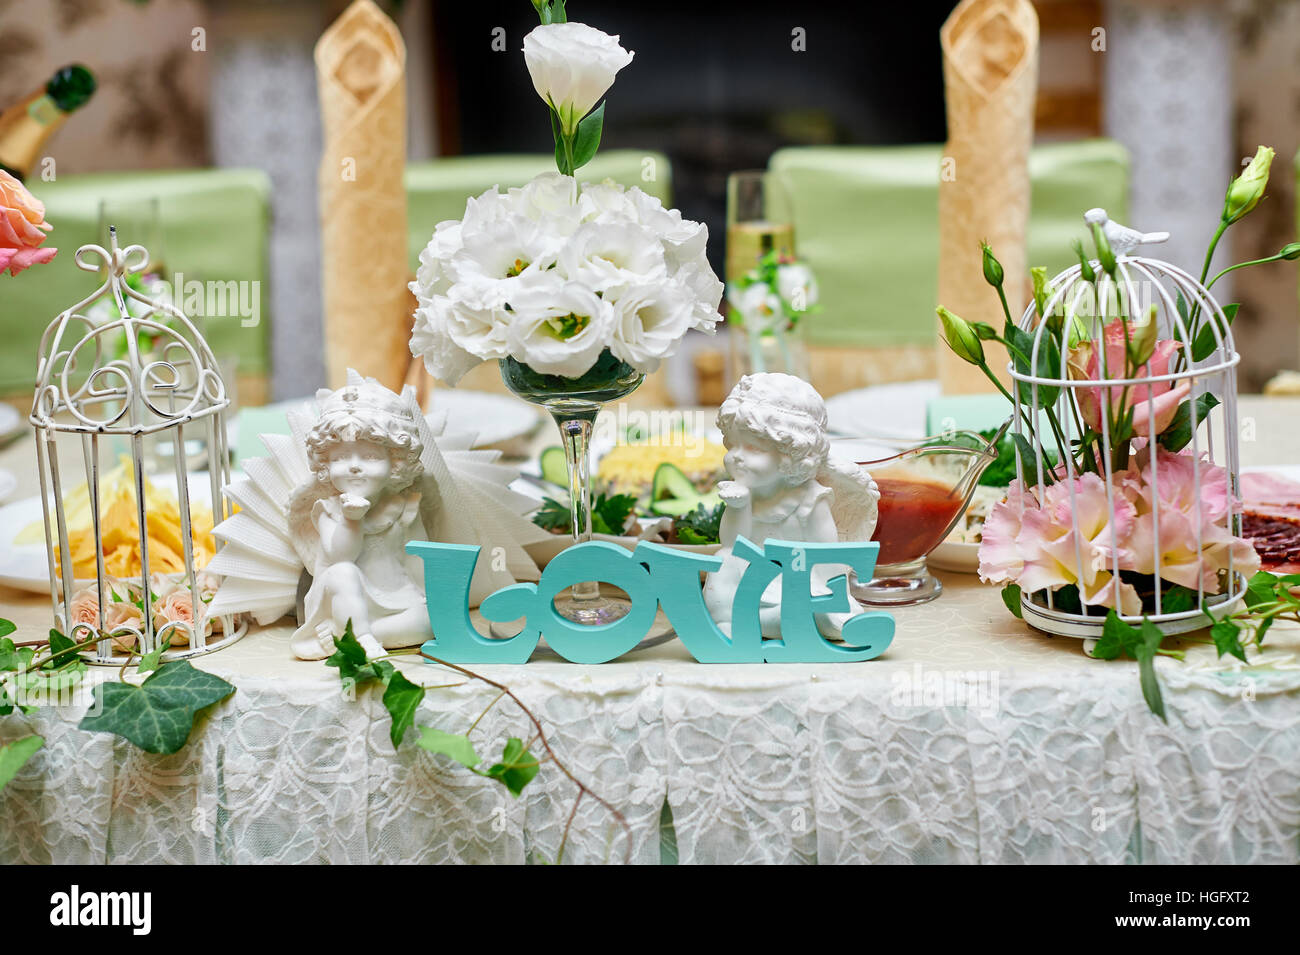 beautiful wedding decorations of flowers on a table in the restaurant Stock Photo